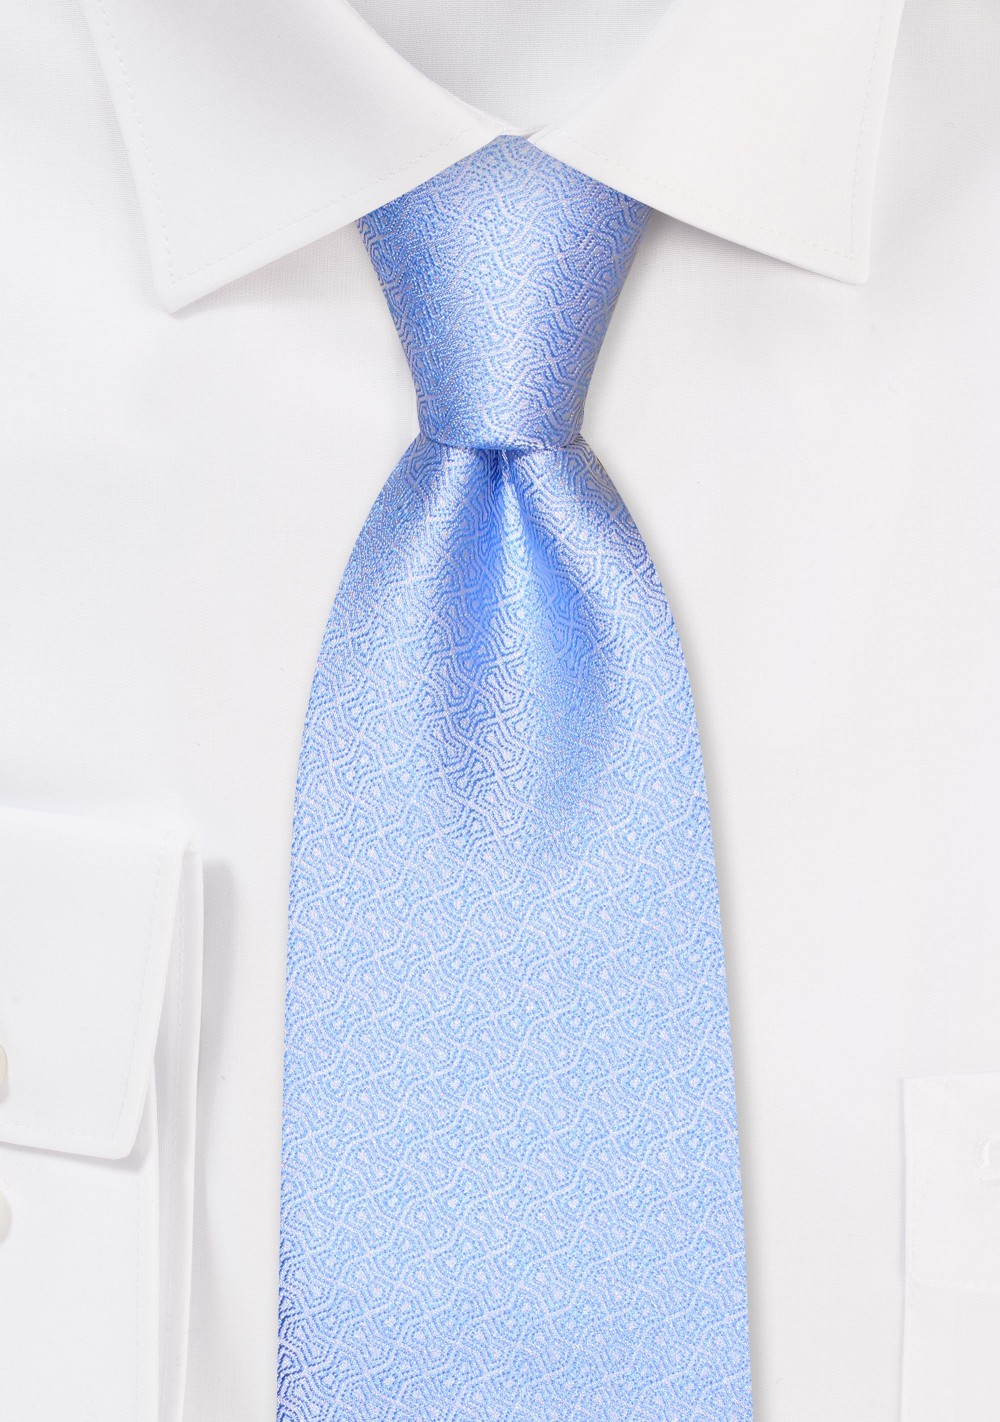 Geo Check Tie in Ice Blue